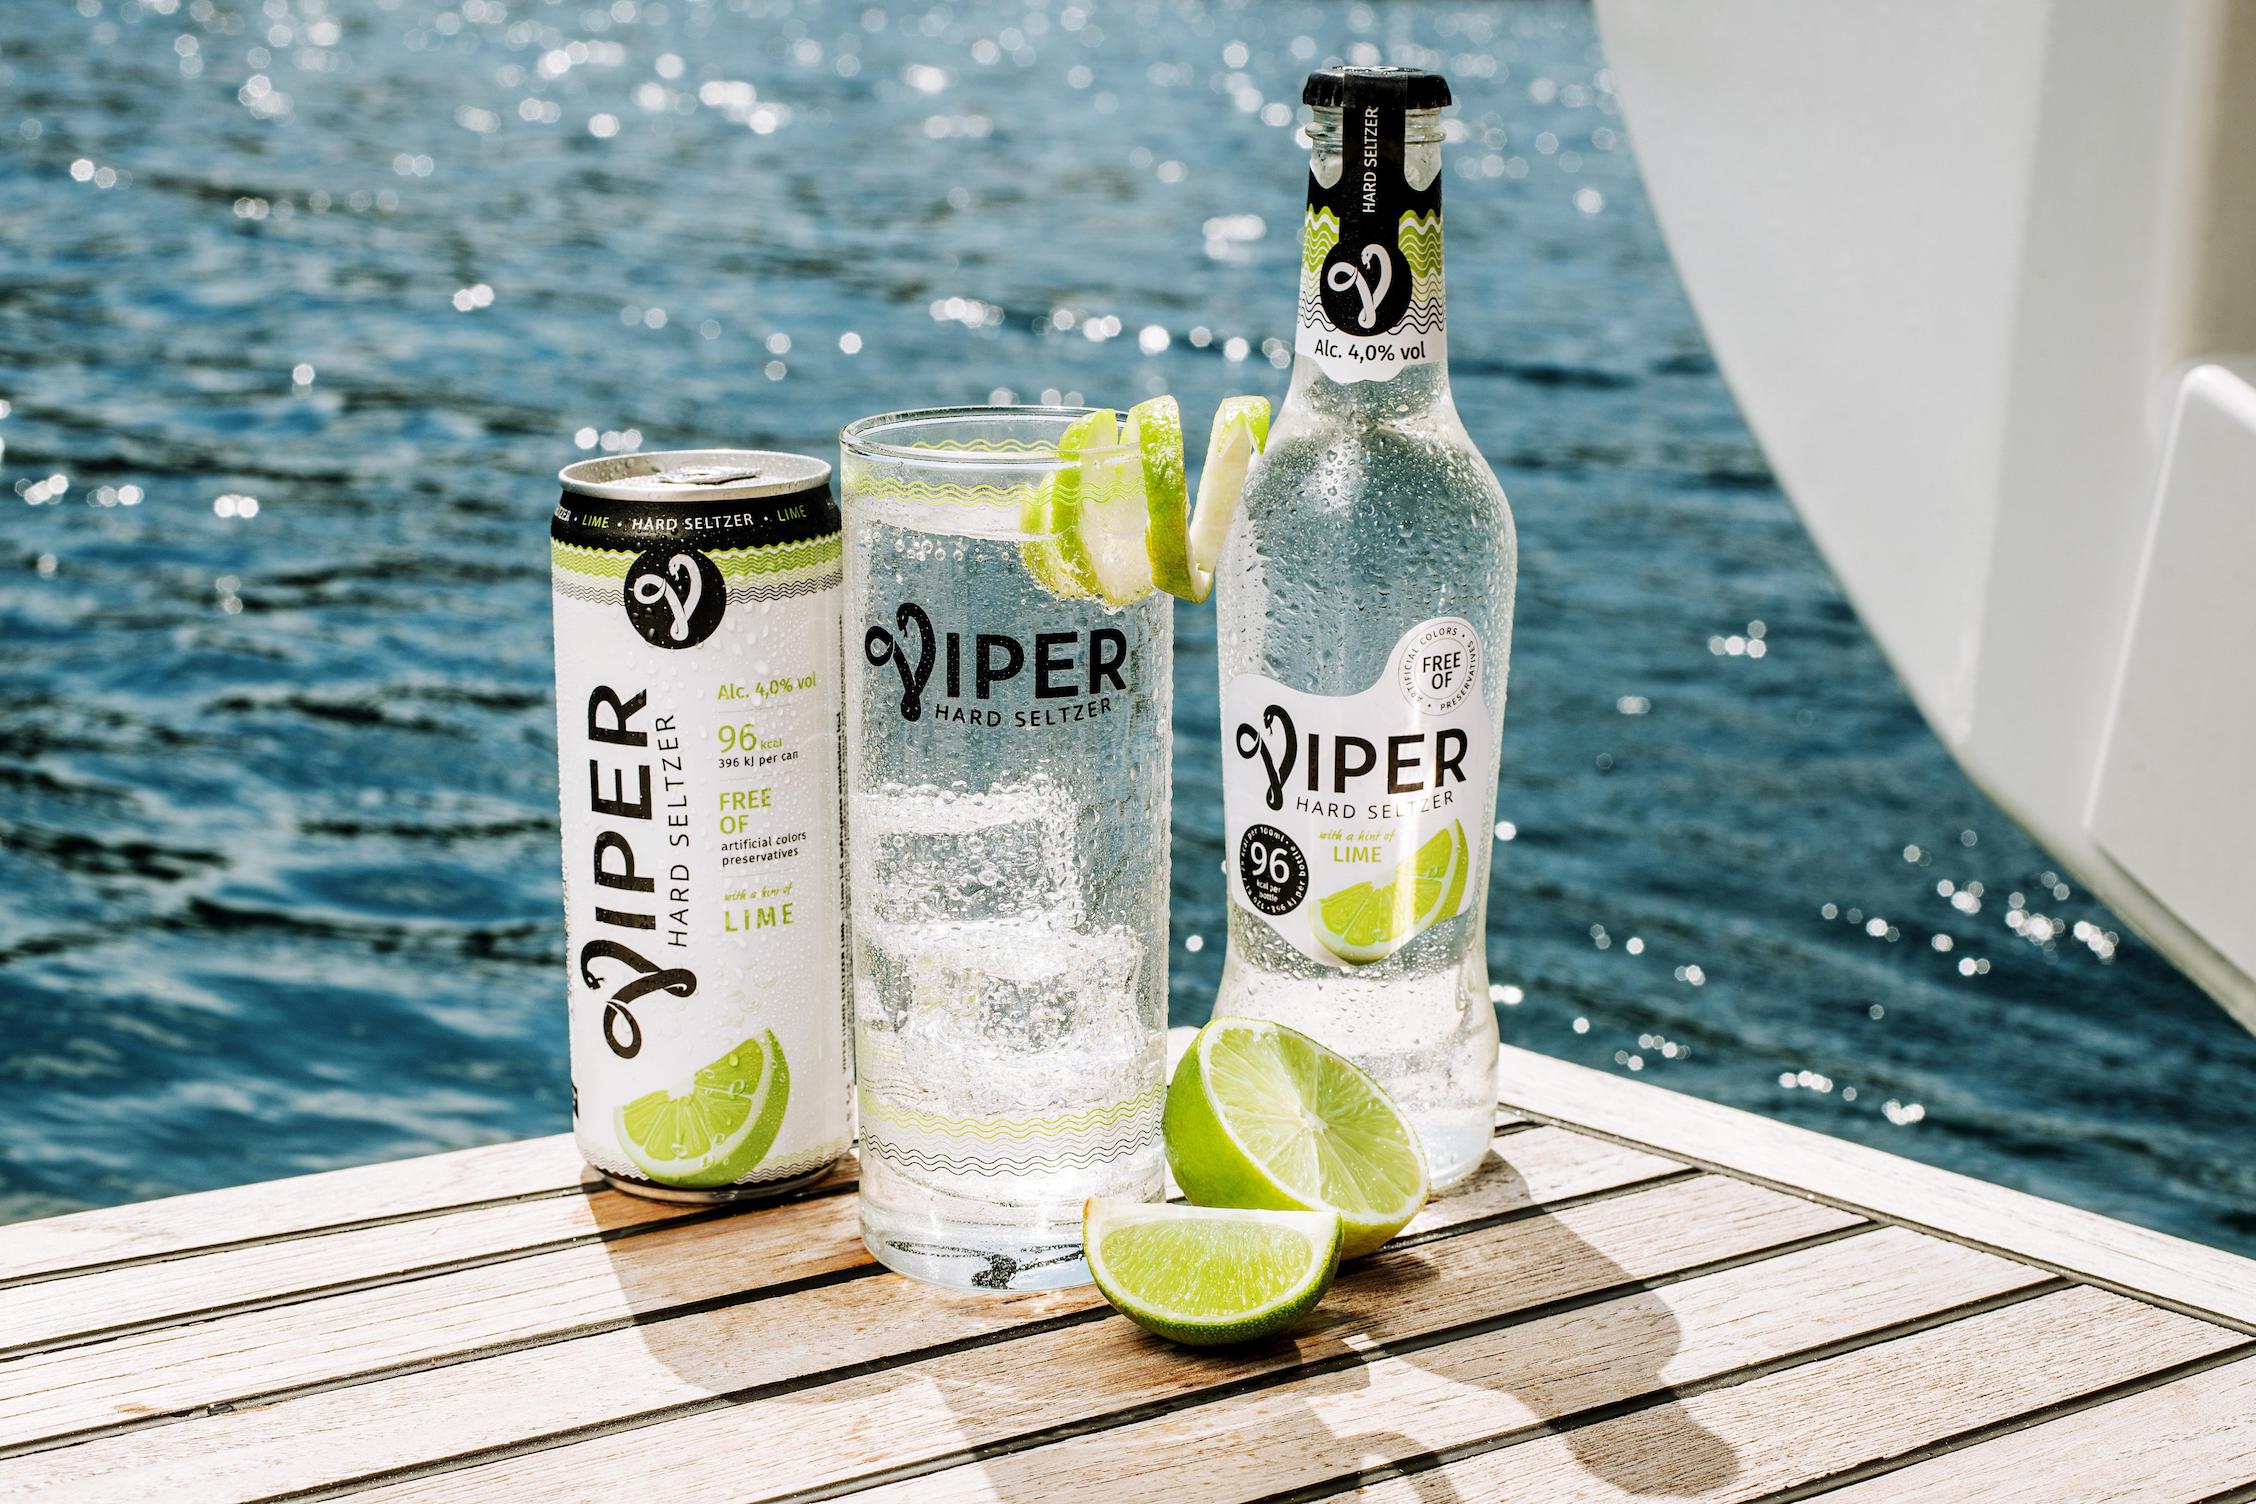 Dreher to debut Viper hard seltzer in March